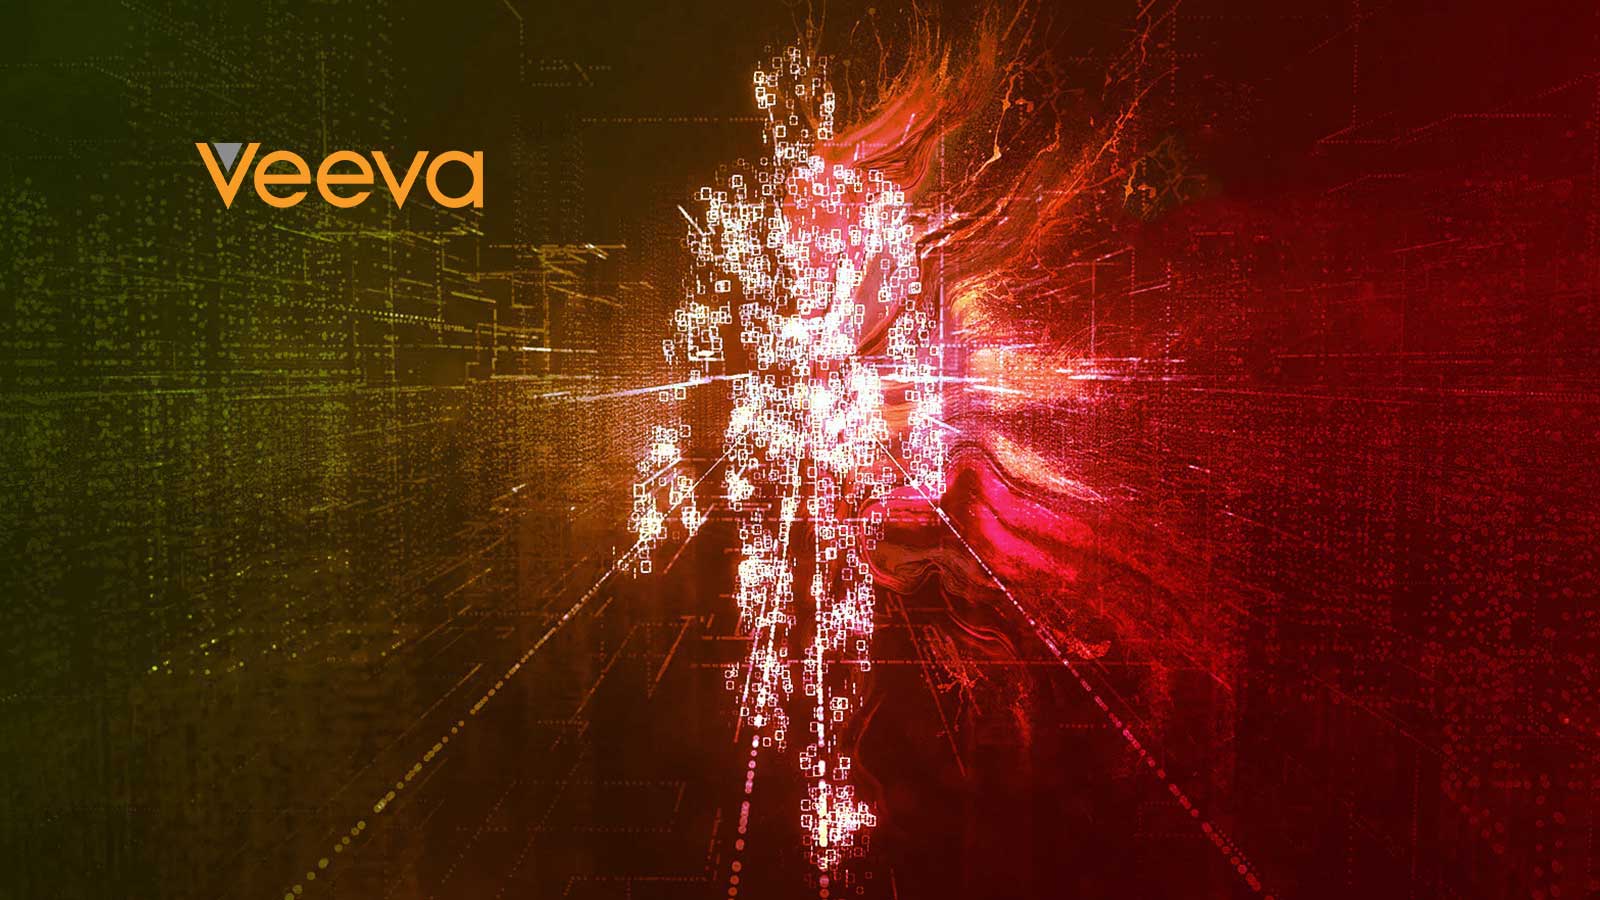 Veeva Clinical Database Crosses 200 Study Milestone, Cuts Time to Aggregate and Clean Study Data by 30-50%